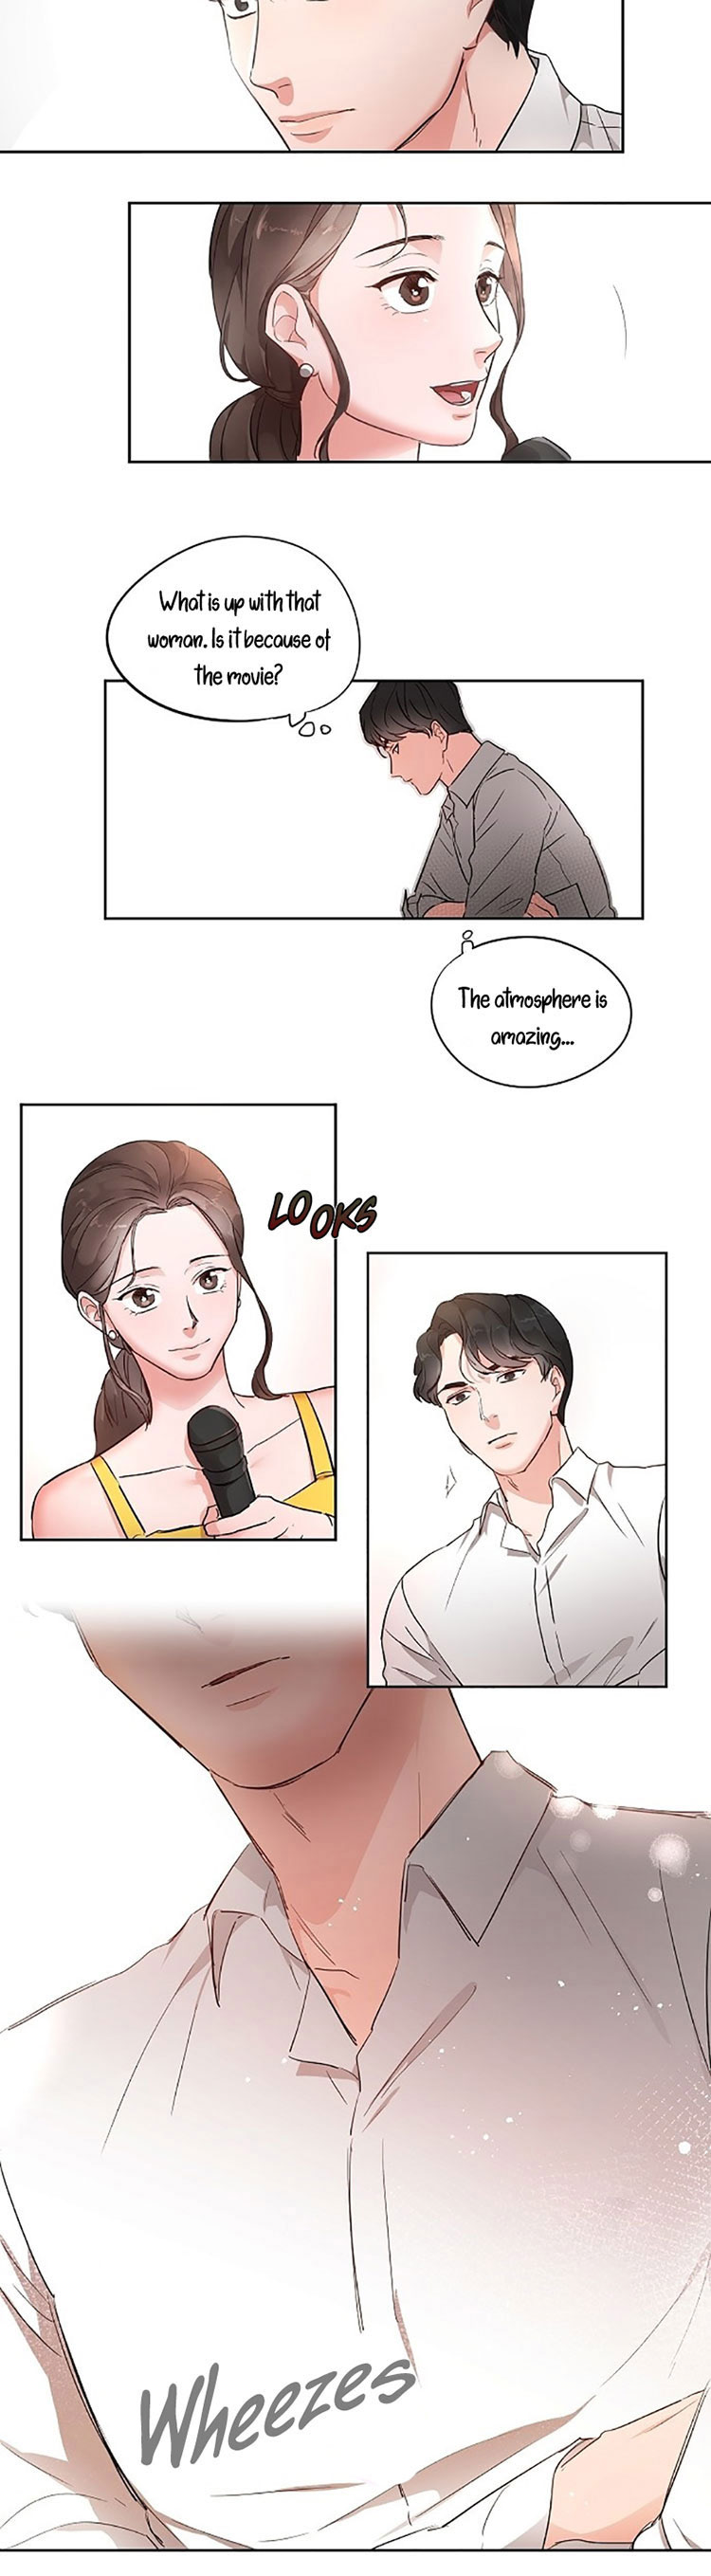 Liking you Excitedly Vol. 1 Ch. 1 Who's that Lady?